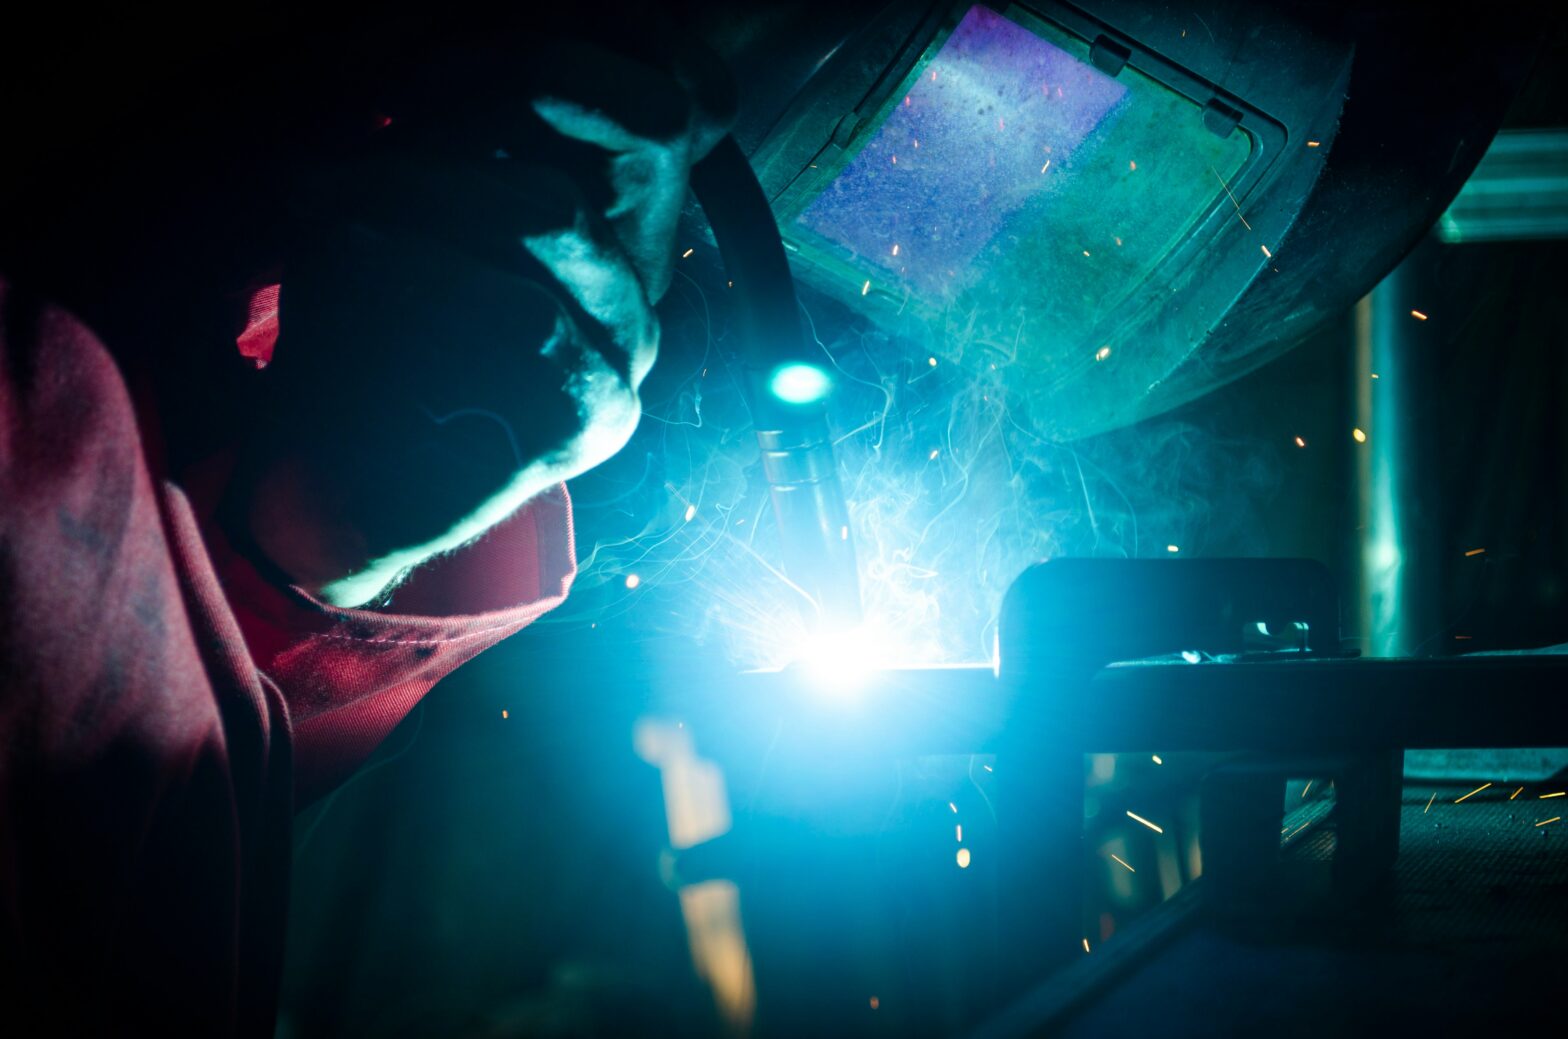 An image of a person using welding equipment and wearing welding helmet